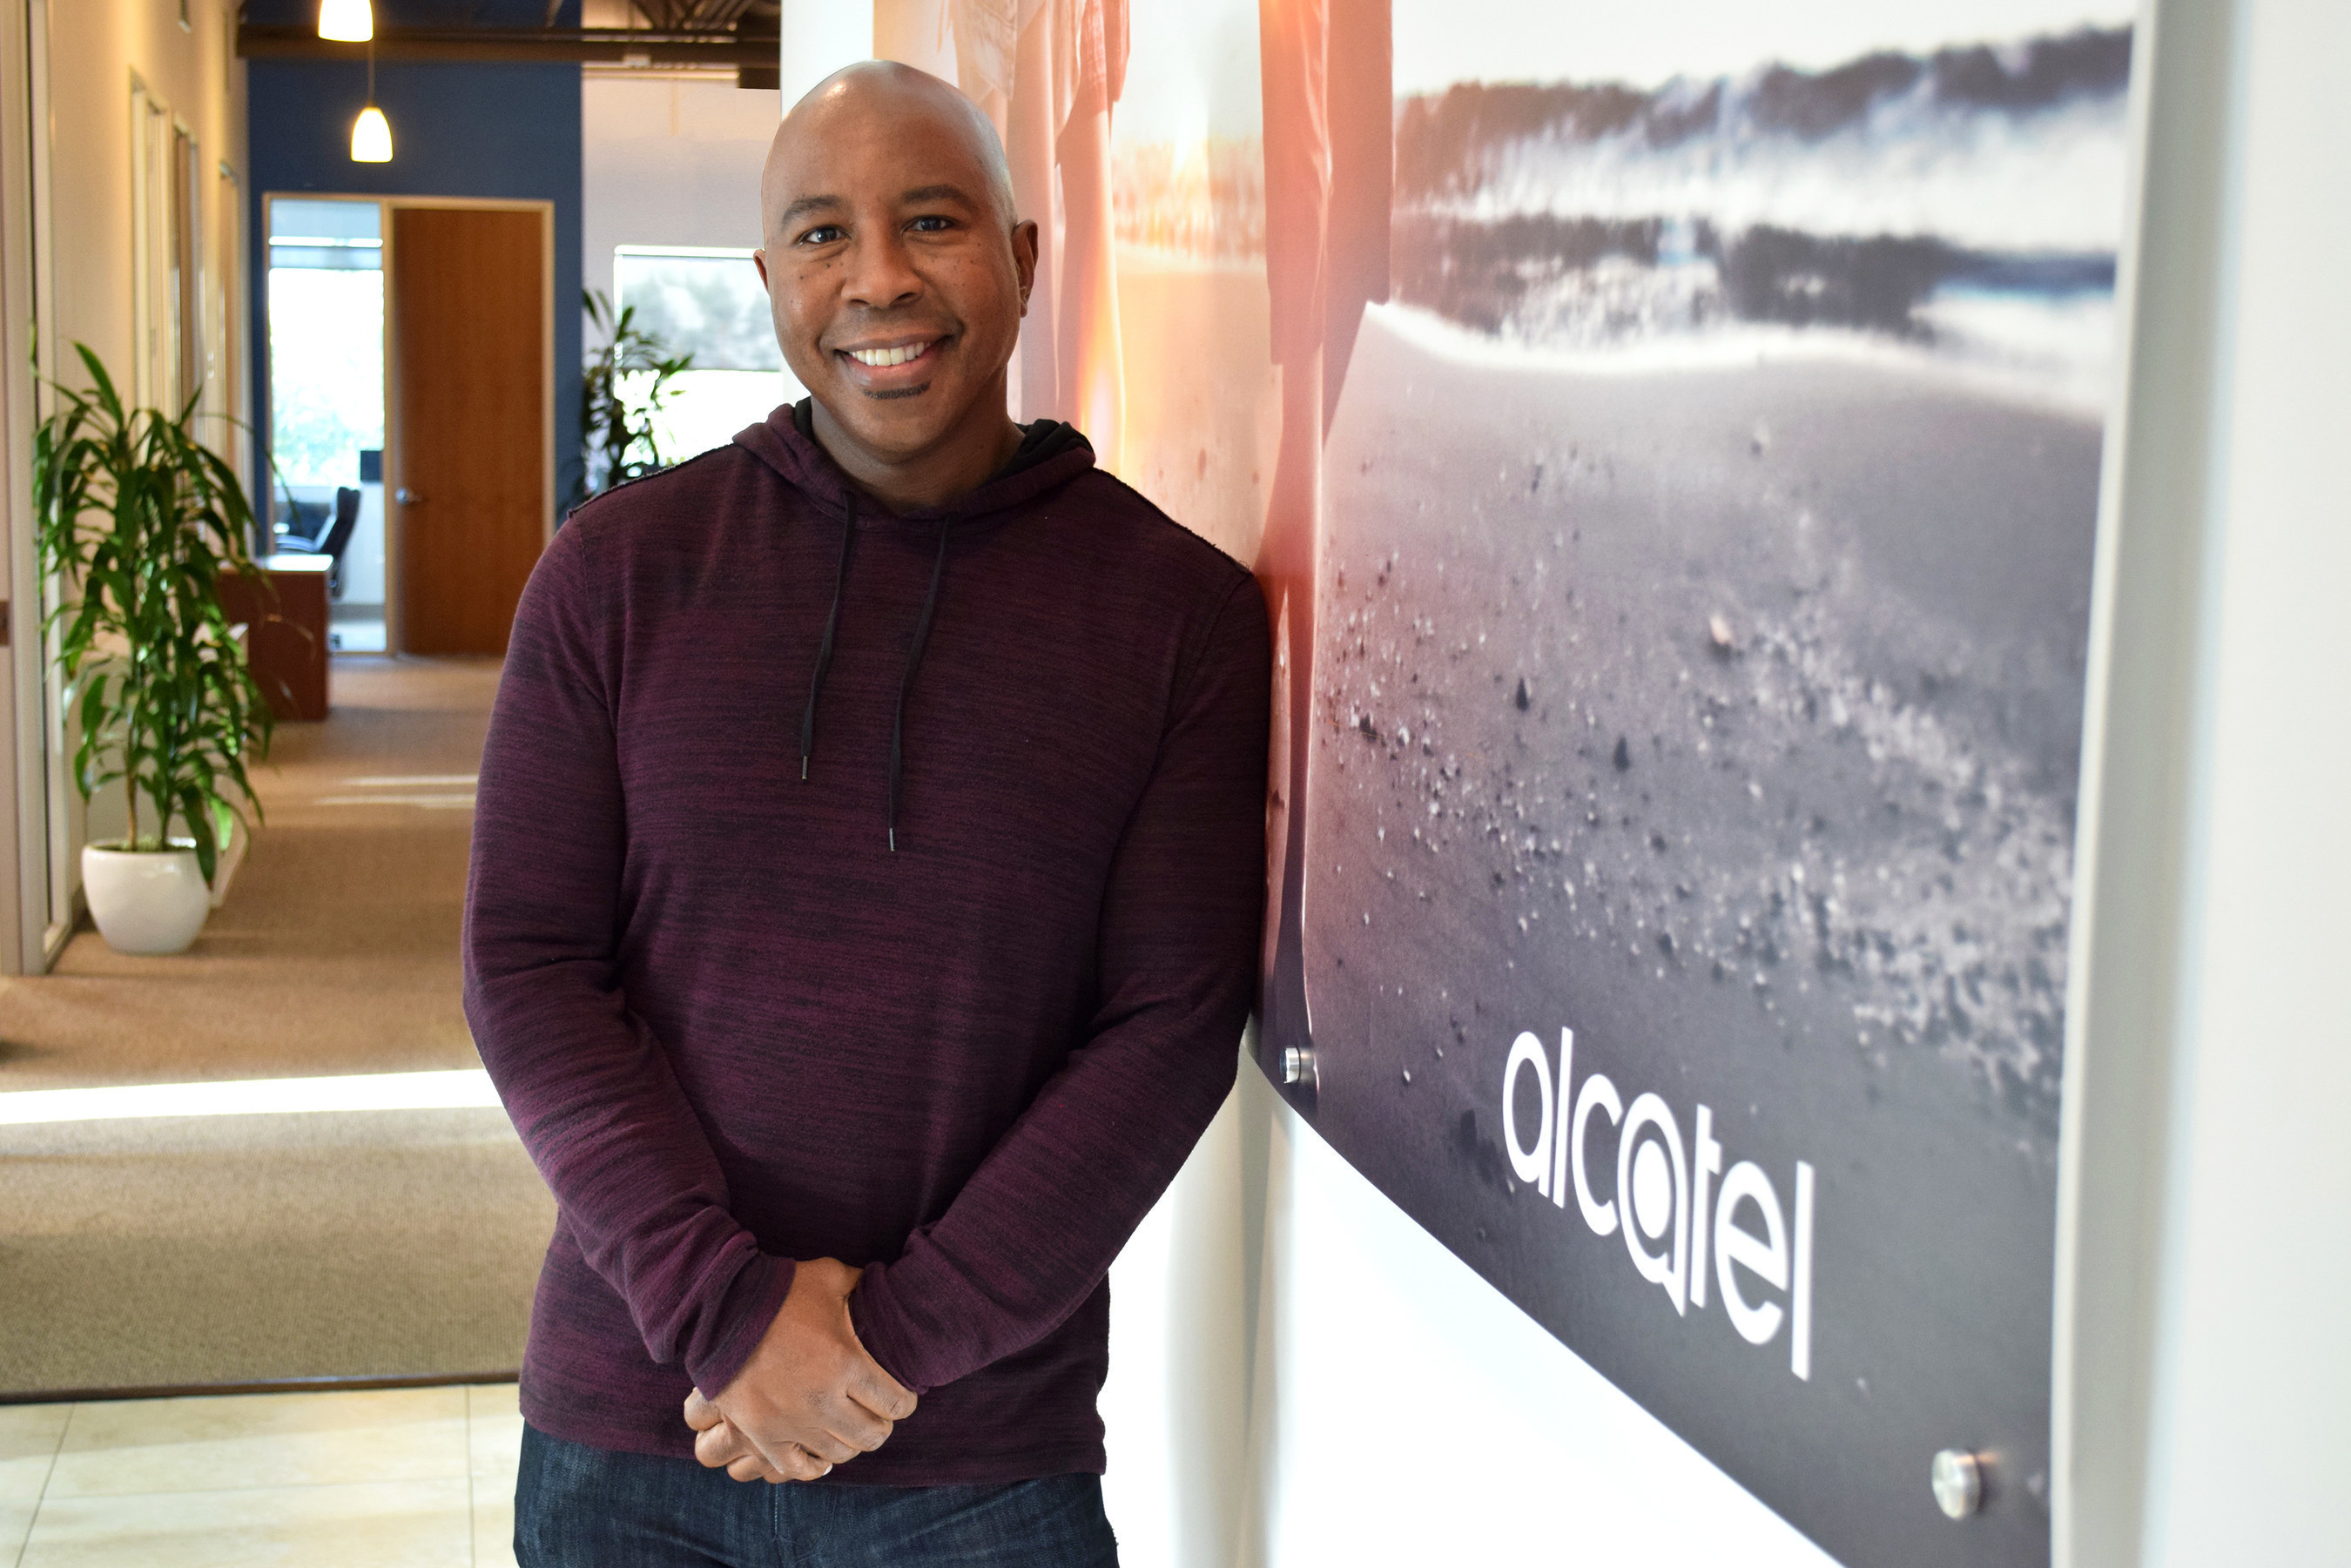 Alcatel announces Wayne White as Vice President of Sales for North America